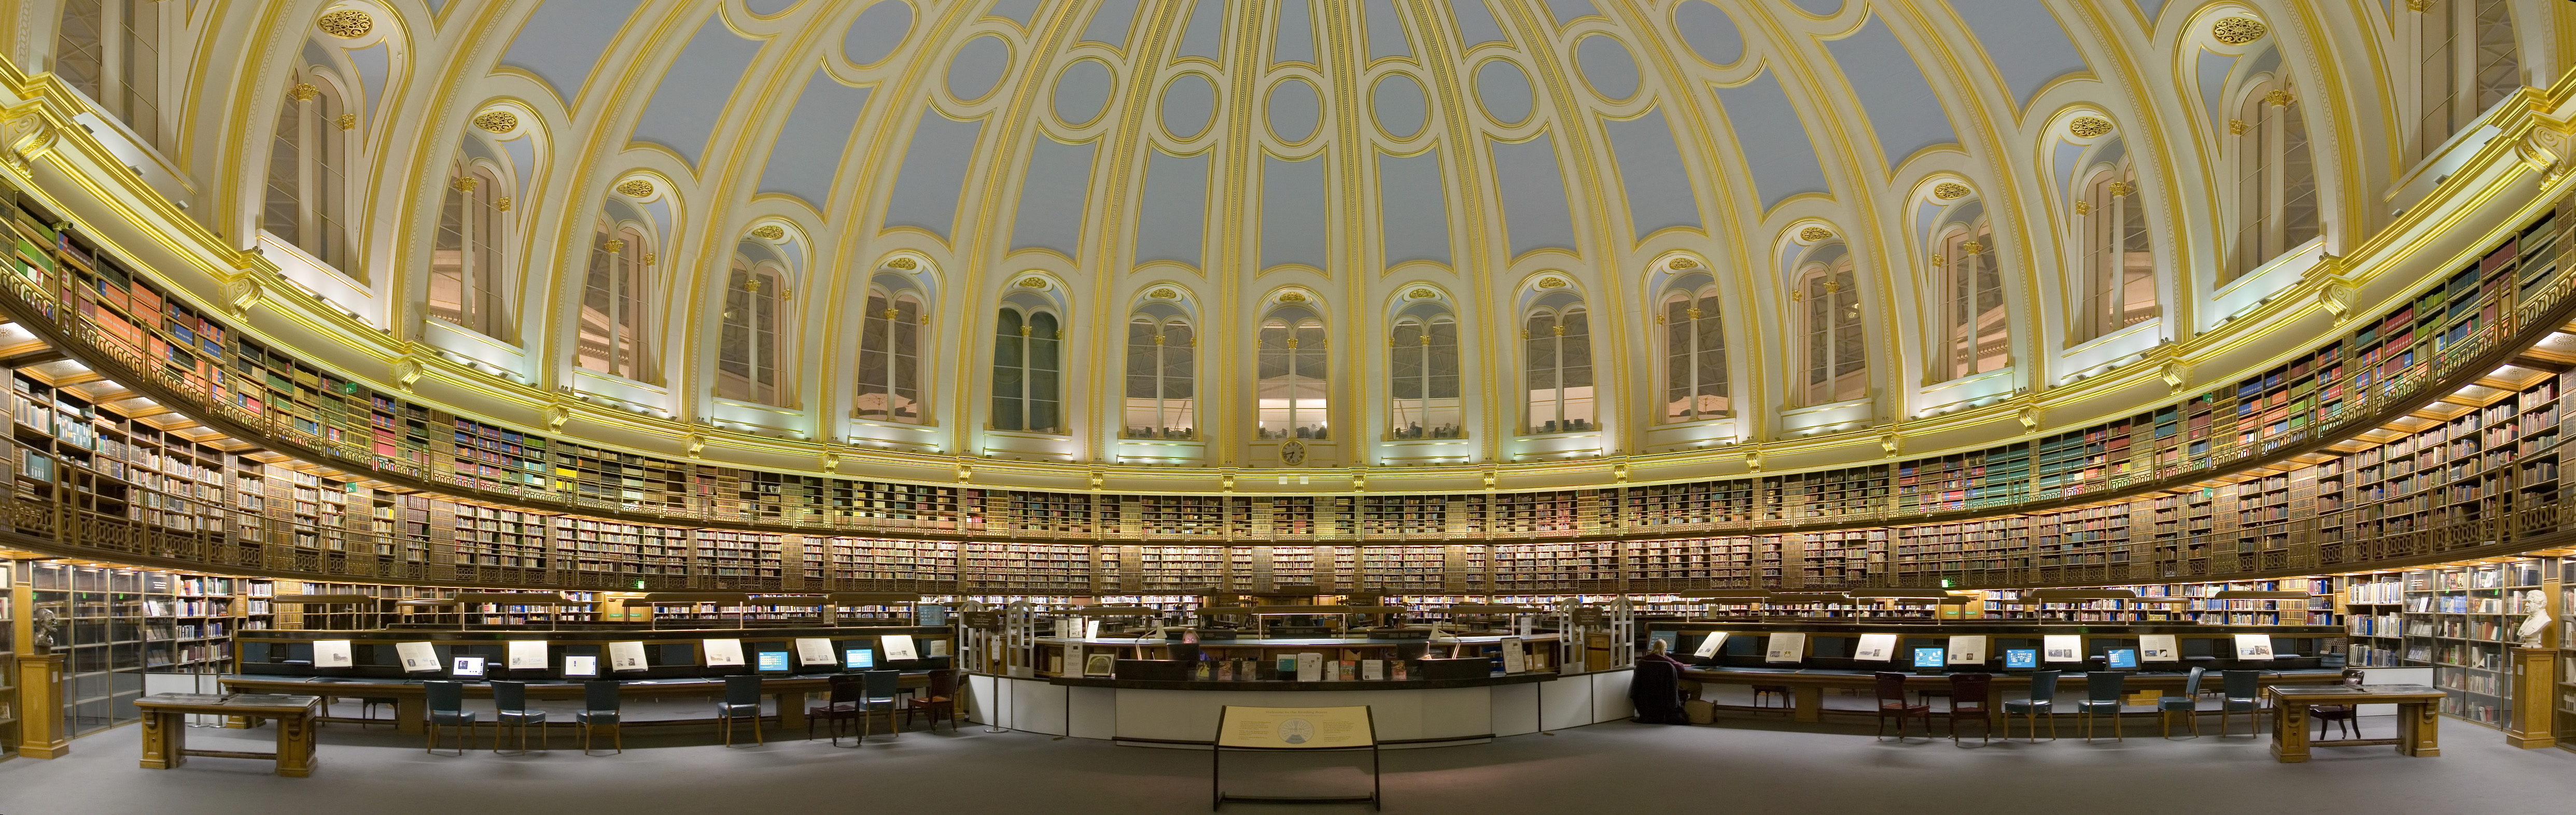 man made, library wallpapers for tablet